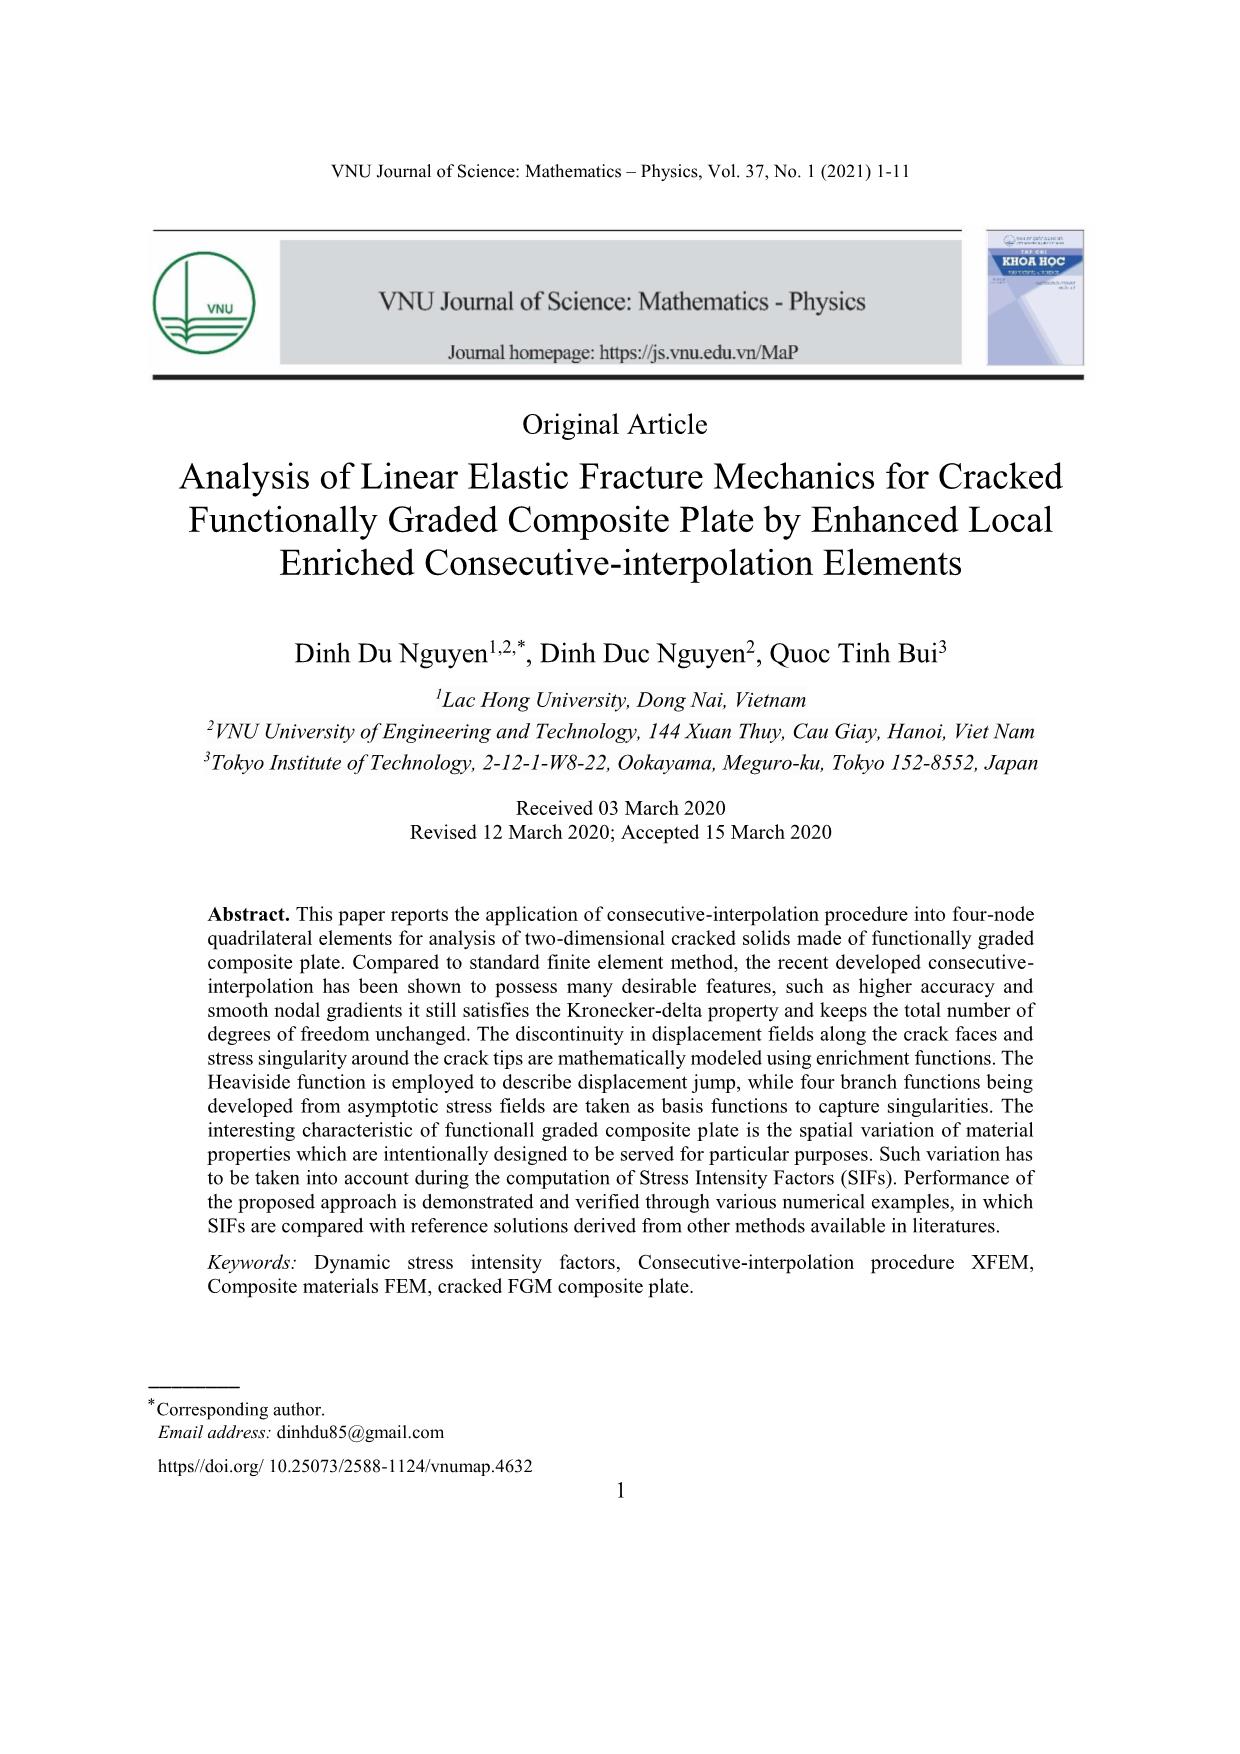 Analysis of linear elastic fracture mechanics for cracked functionally graded composite plate by enhanced local enriched consecutive - Interpolation elements trang 1